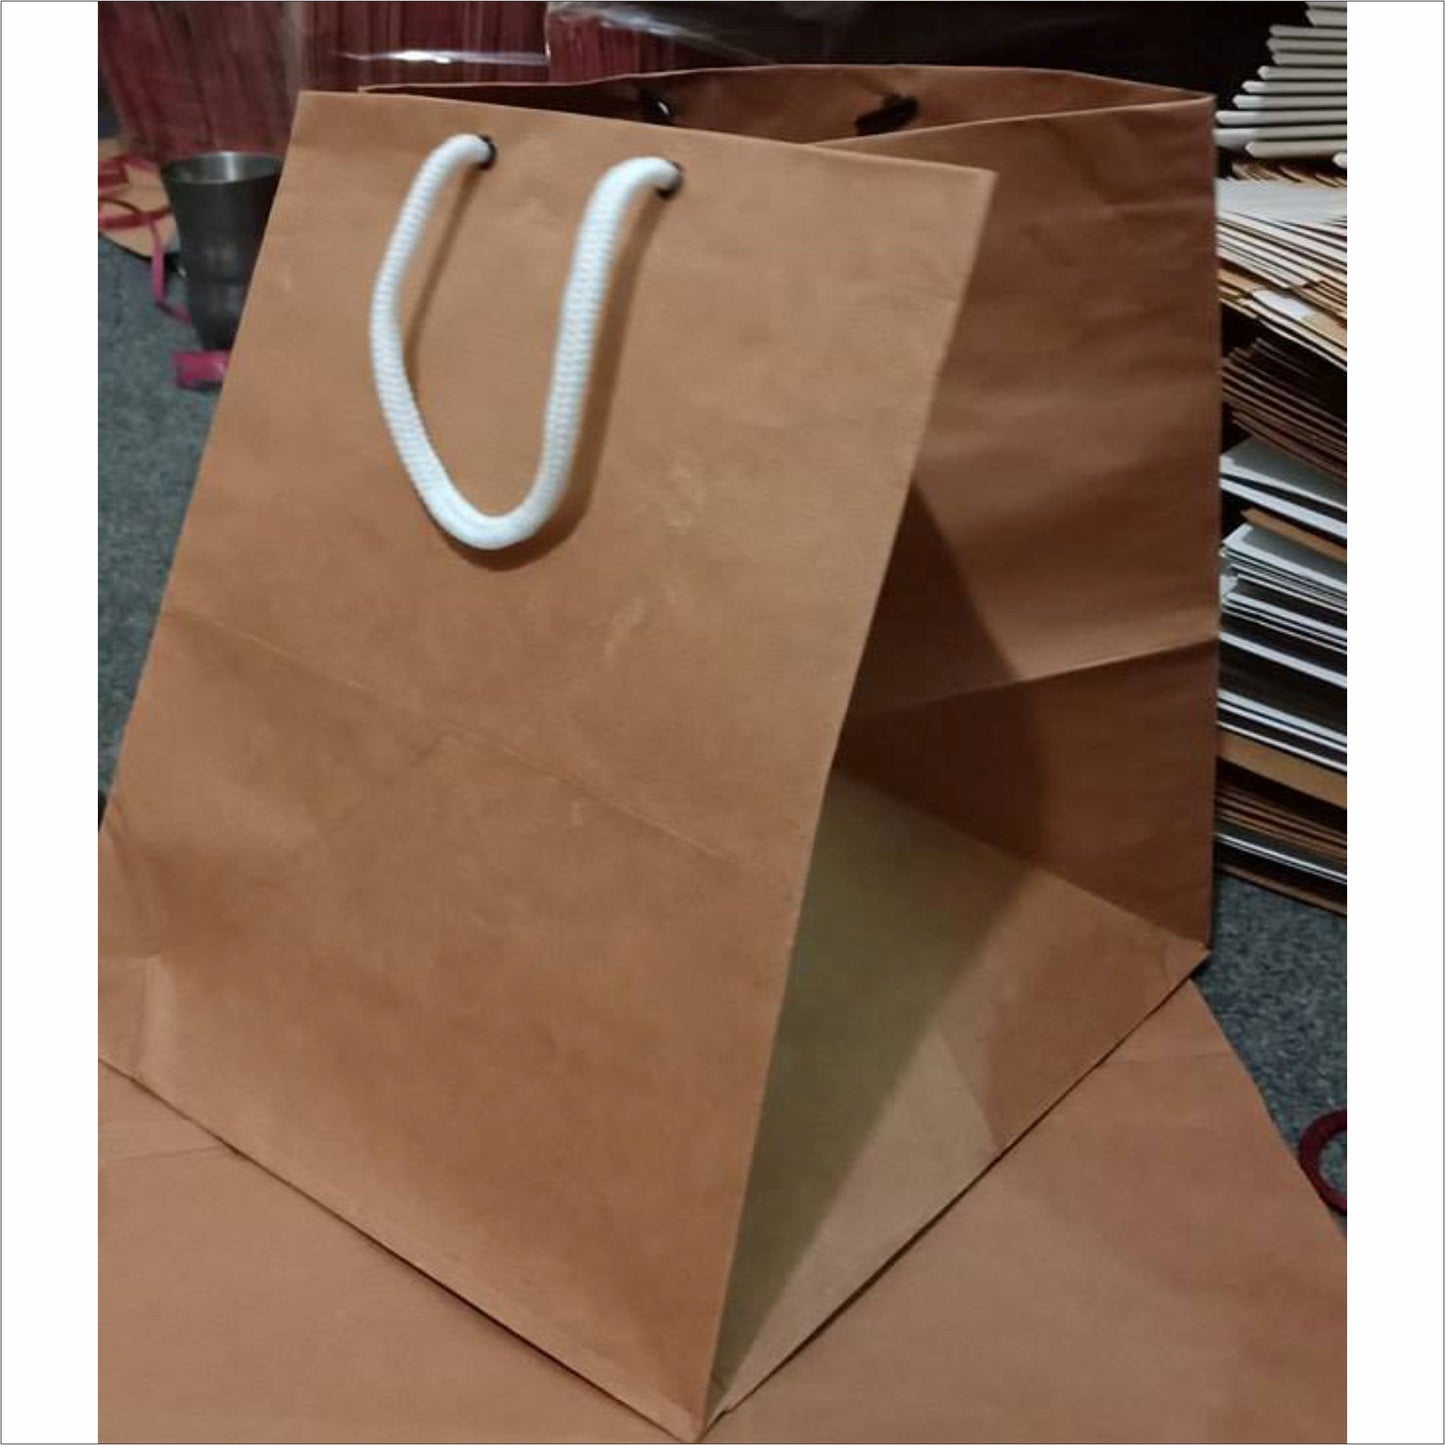 8x8x8 inch Paper Bag for 7 inch Cake Boxes